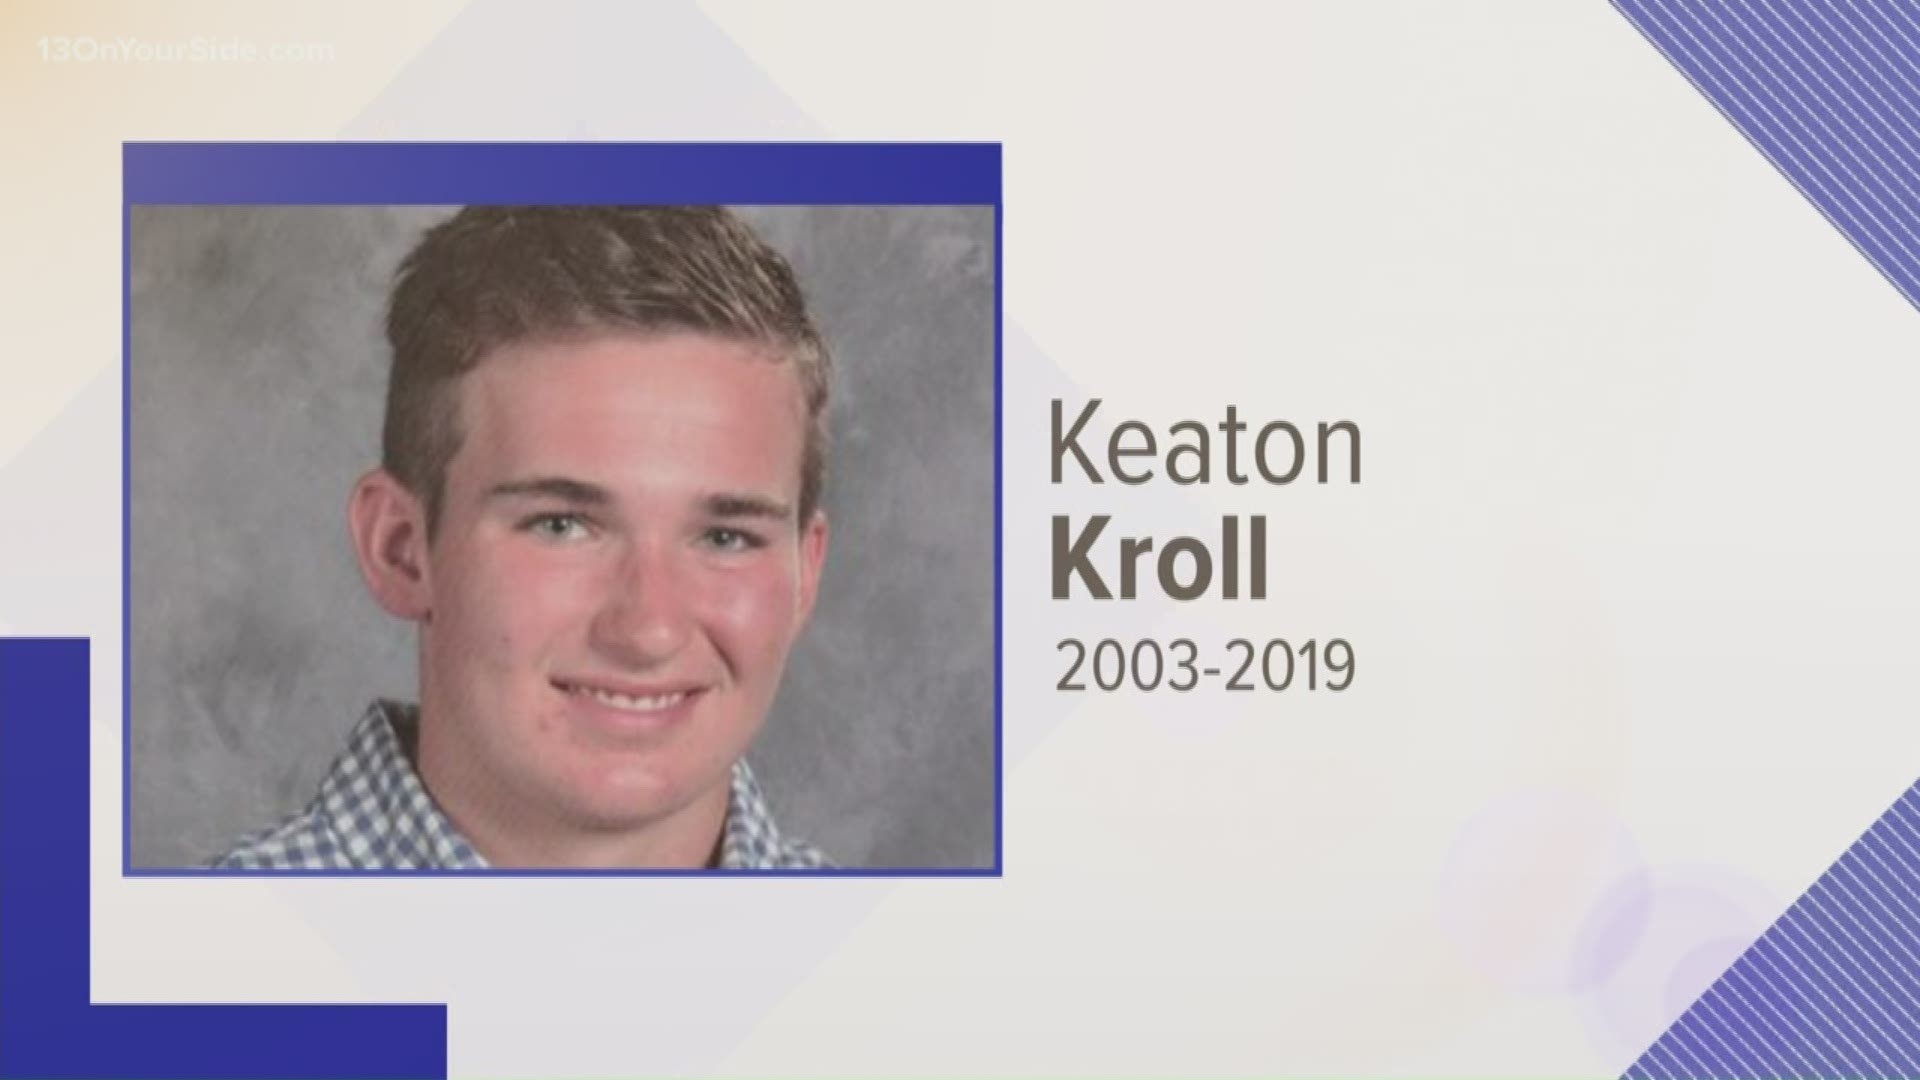 Keaton Kroll, 16, died Saturday while playing an indoor soccer game. The teen was a sophomore at Zeeland East High School and played on the soccer team.